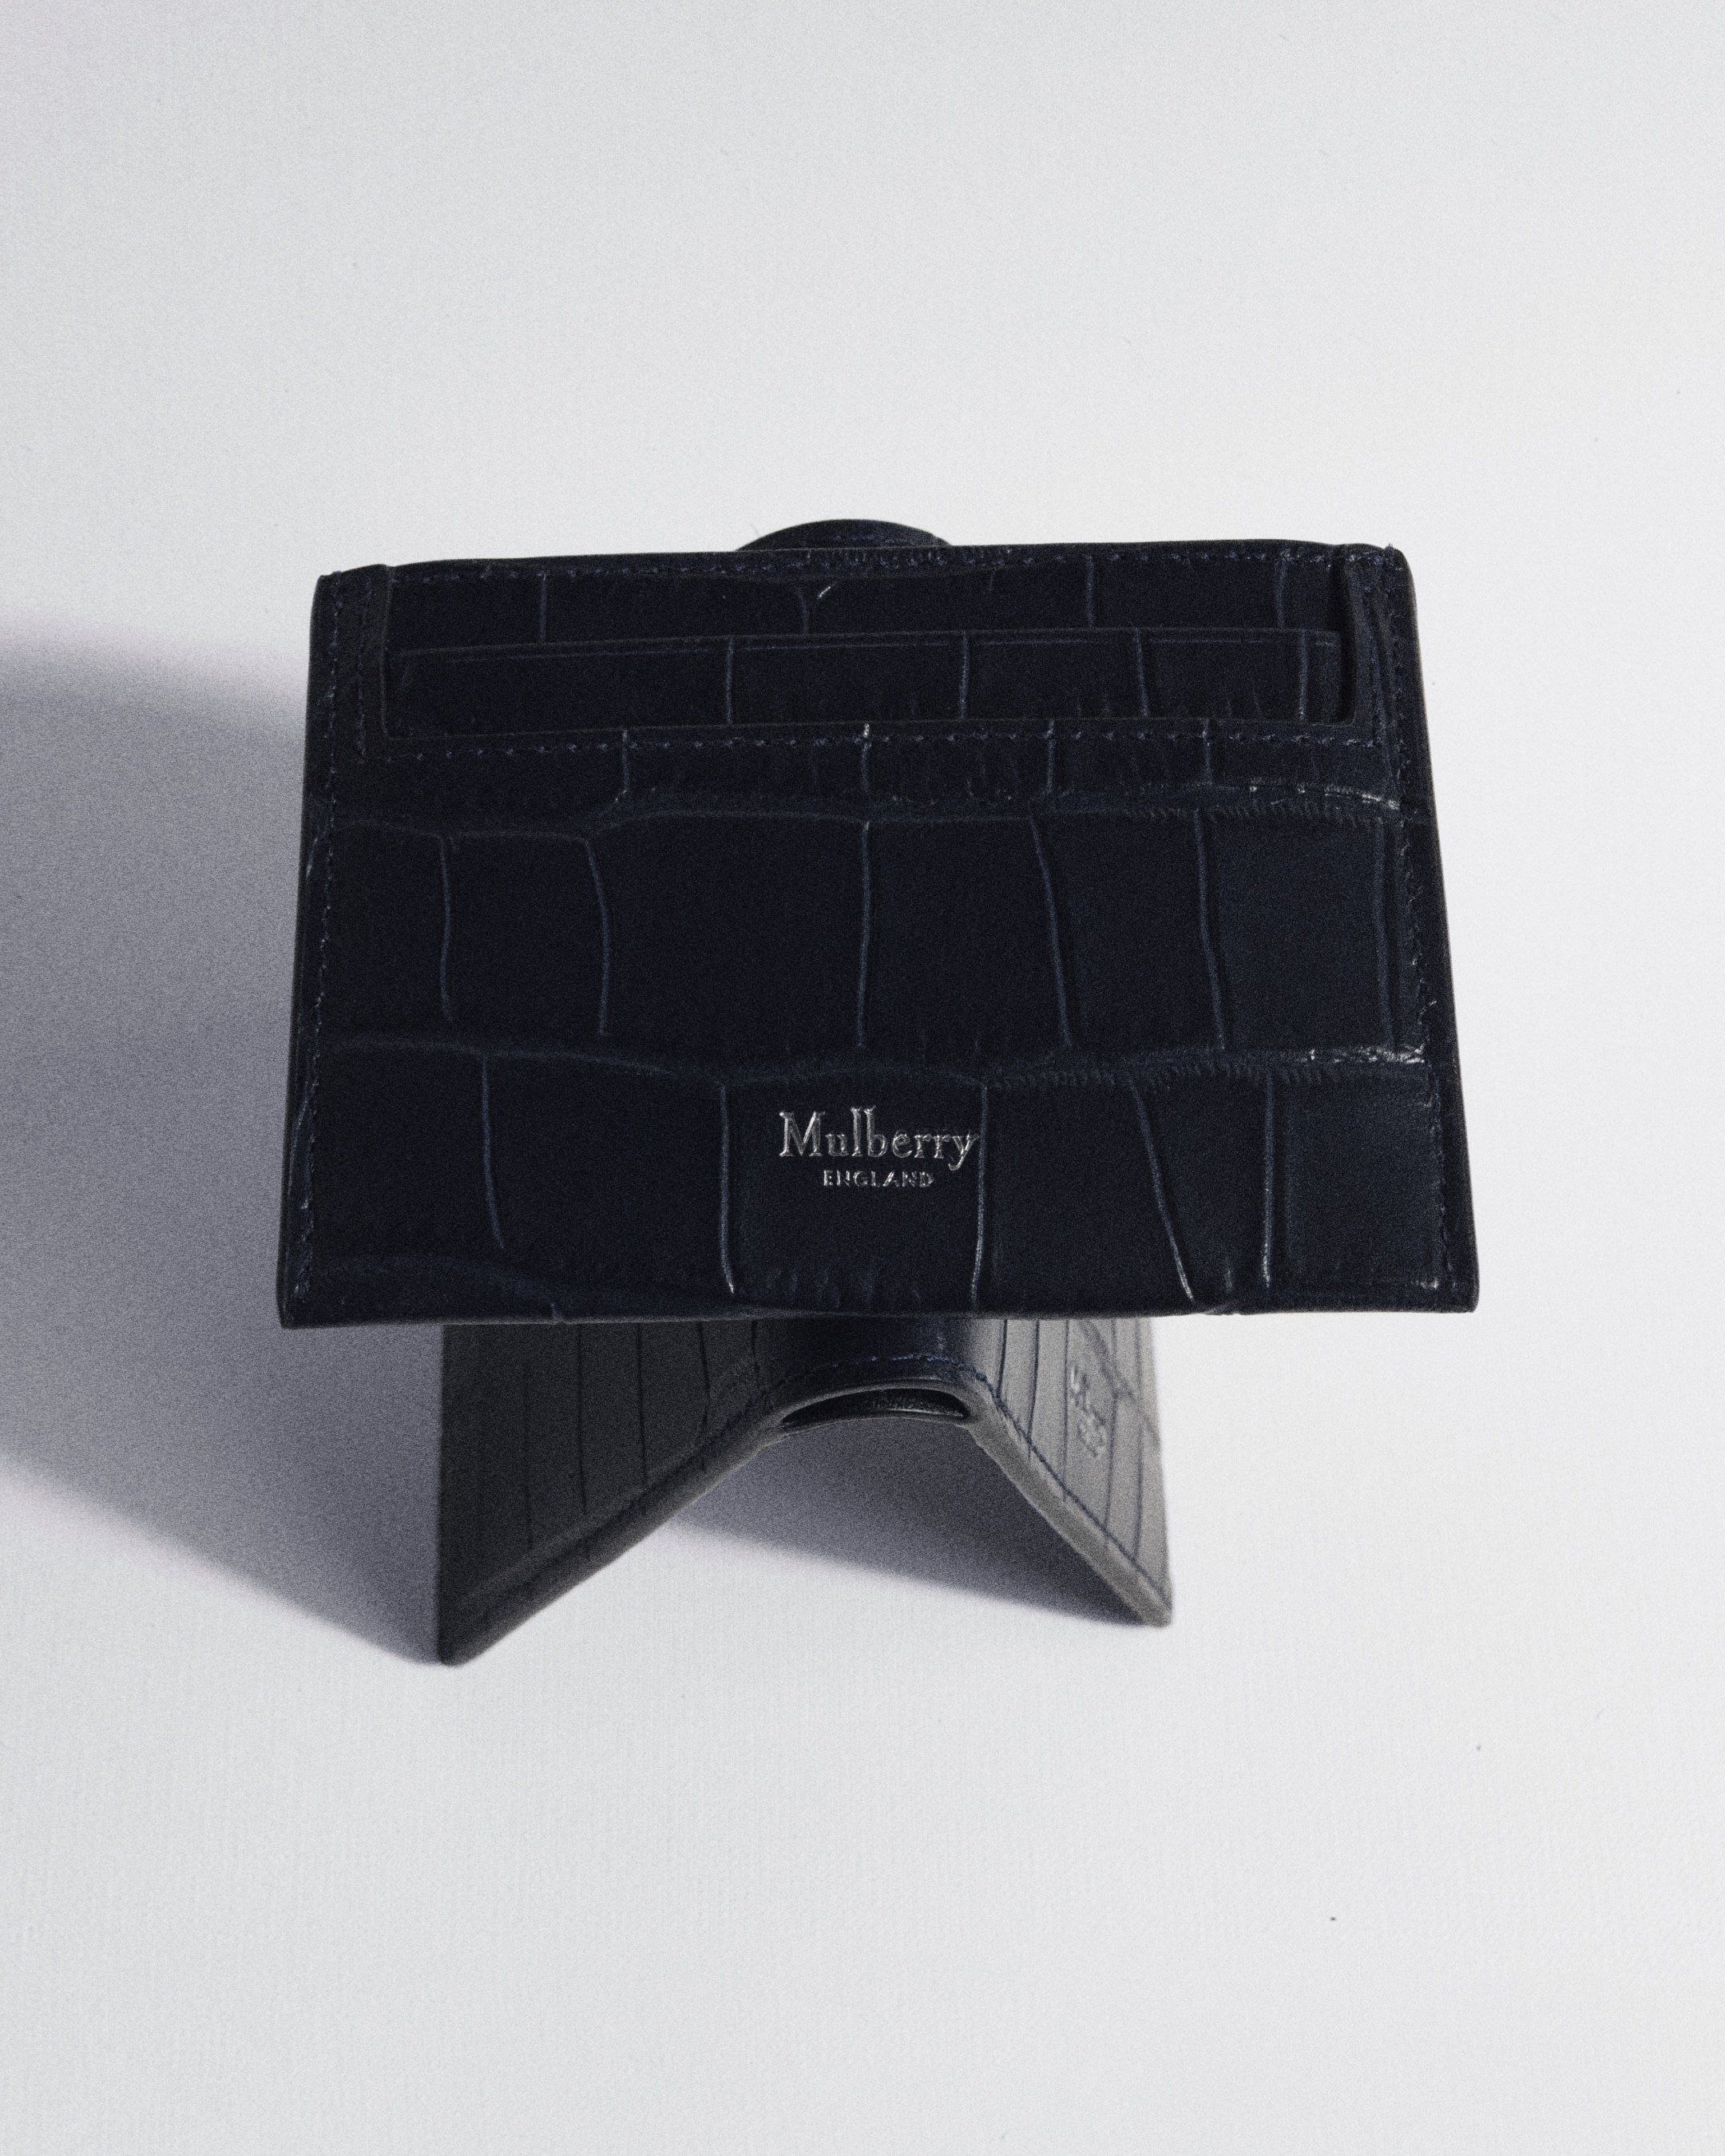 Mulberry Credit Card Slips in navy croc print leather